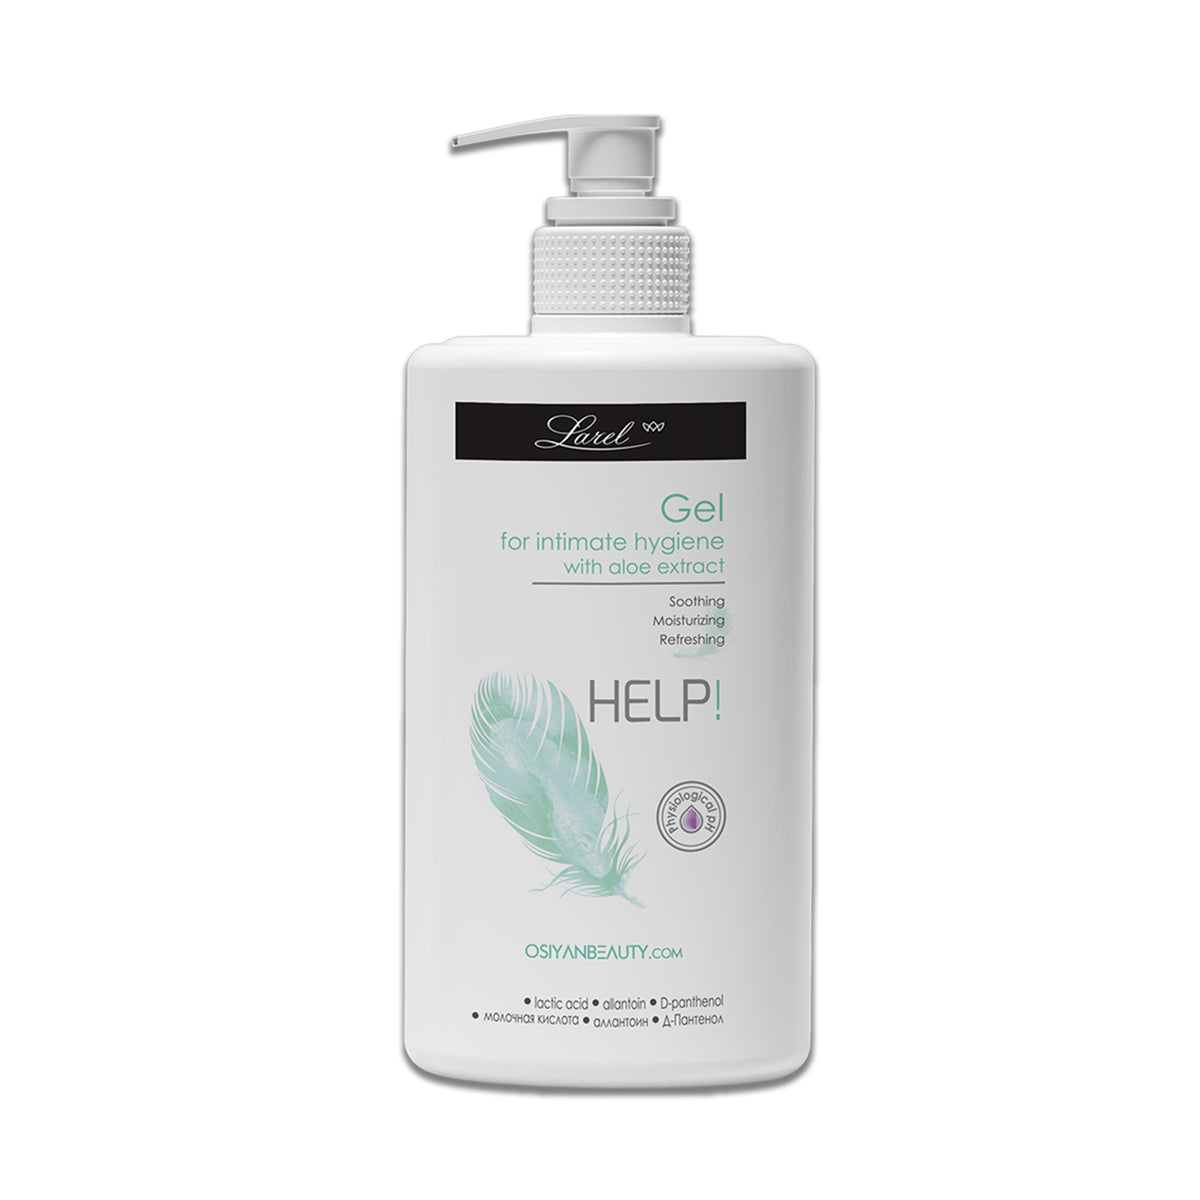 Gel For Intimate Hygiene aloe extract(made in Europe)